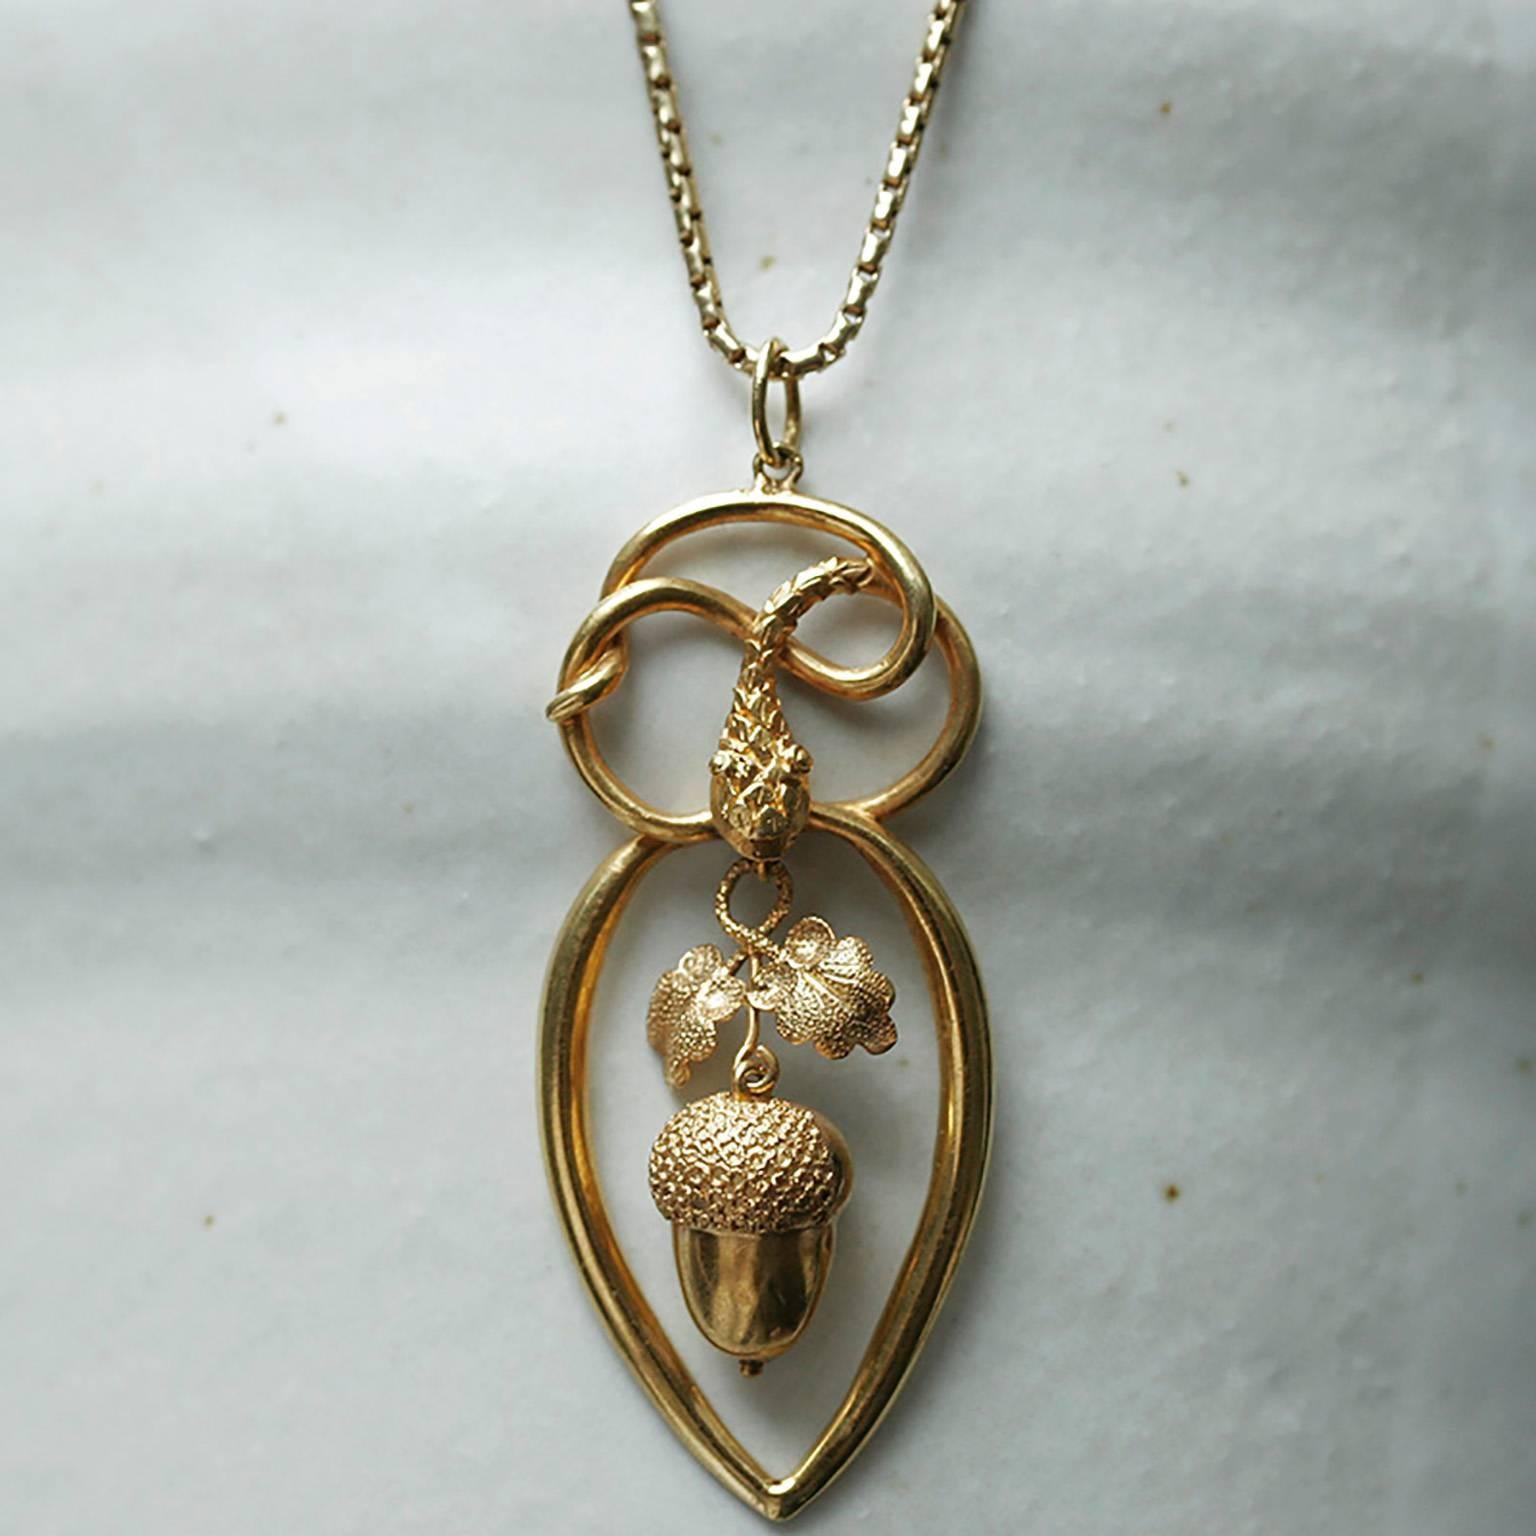 C.1860.  An enchanting example of Victorian jewelry: a serpent and dangling acorn pendant. The coiled body of a serpent forms the top part of the pendant; the serpent’s mouth holds an acorn with the leaves. The acorn and the leaves sway delightfully